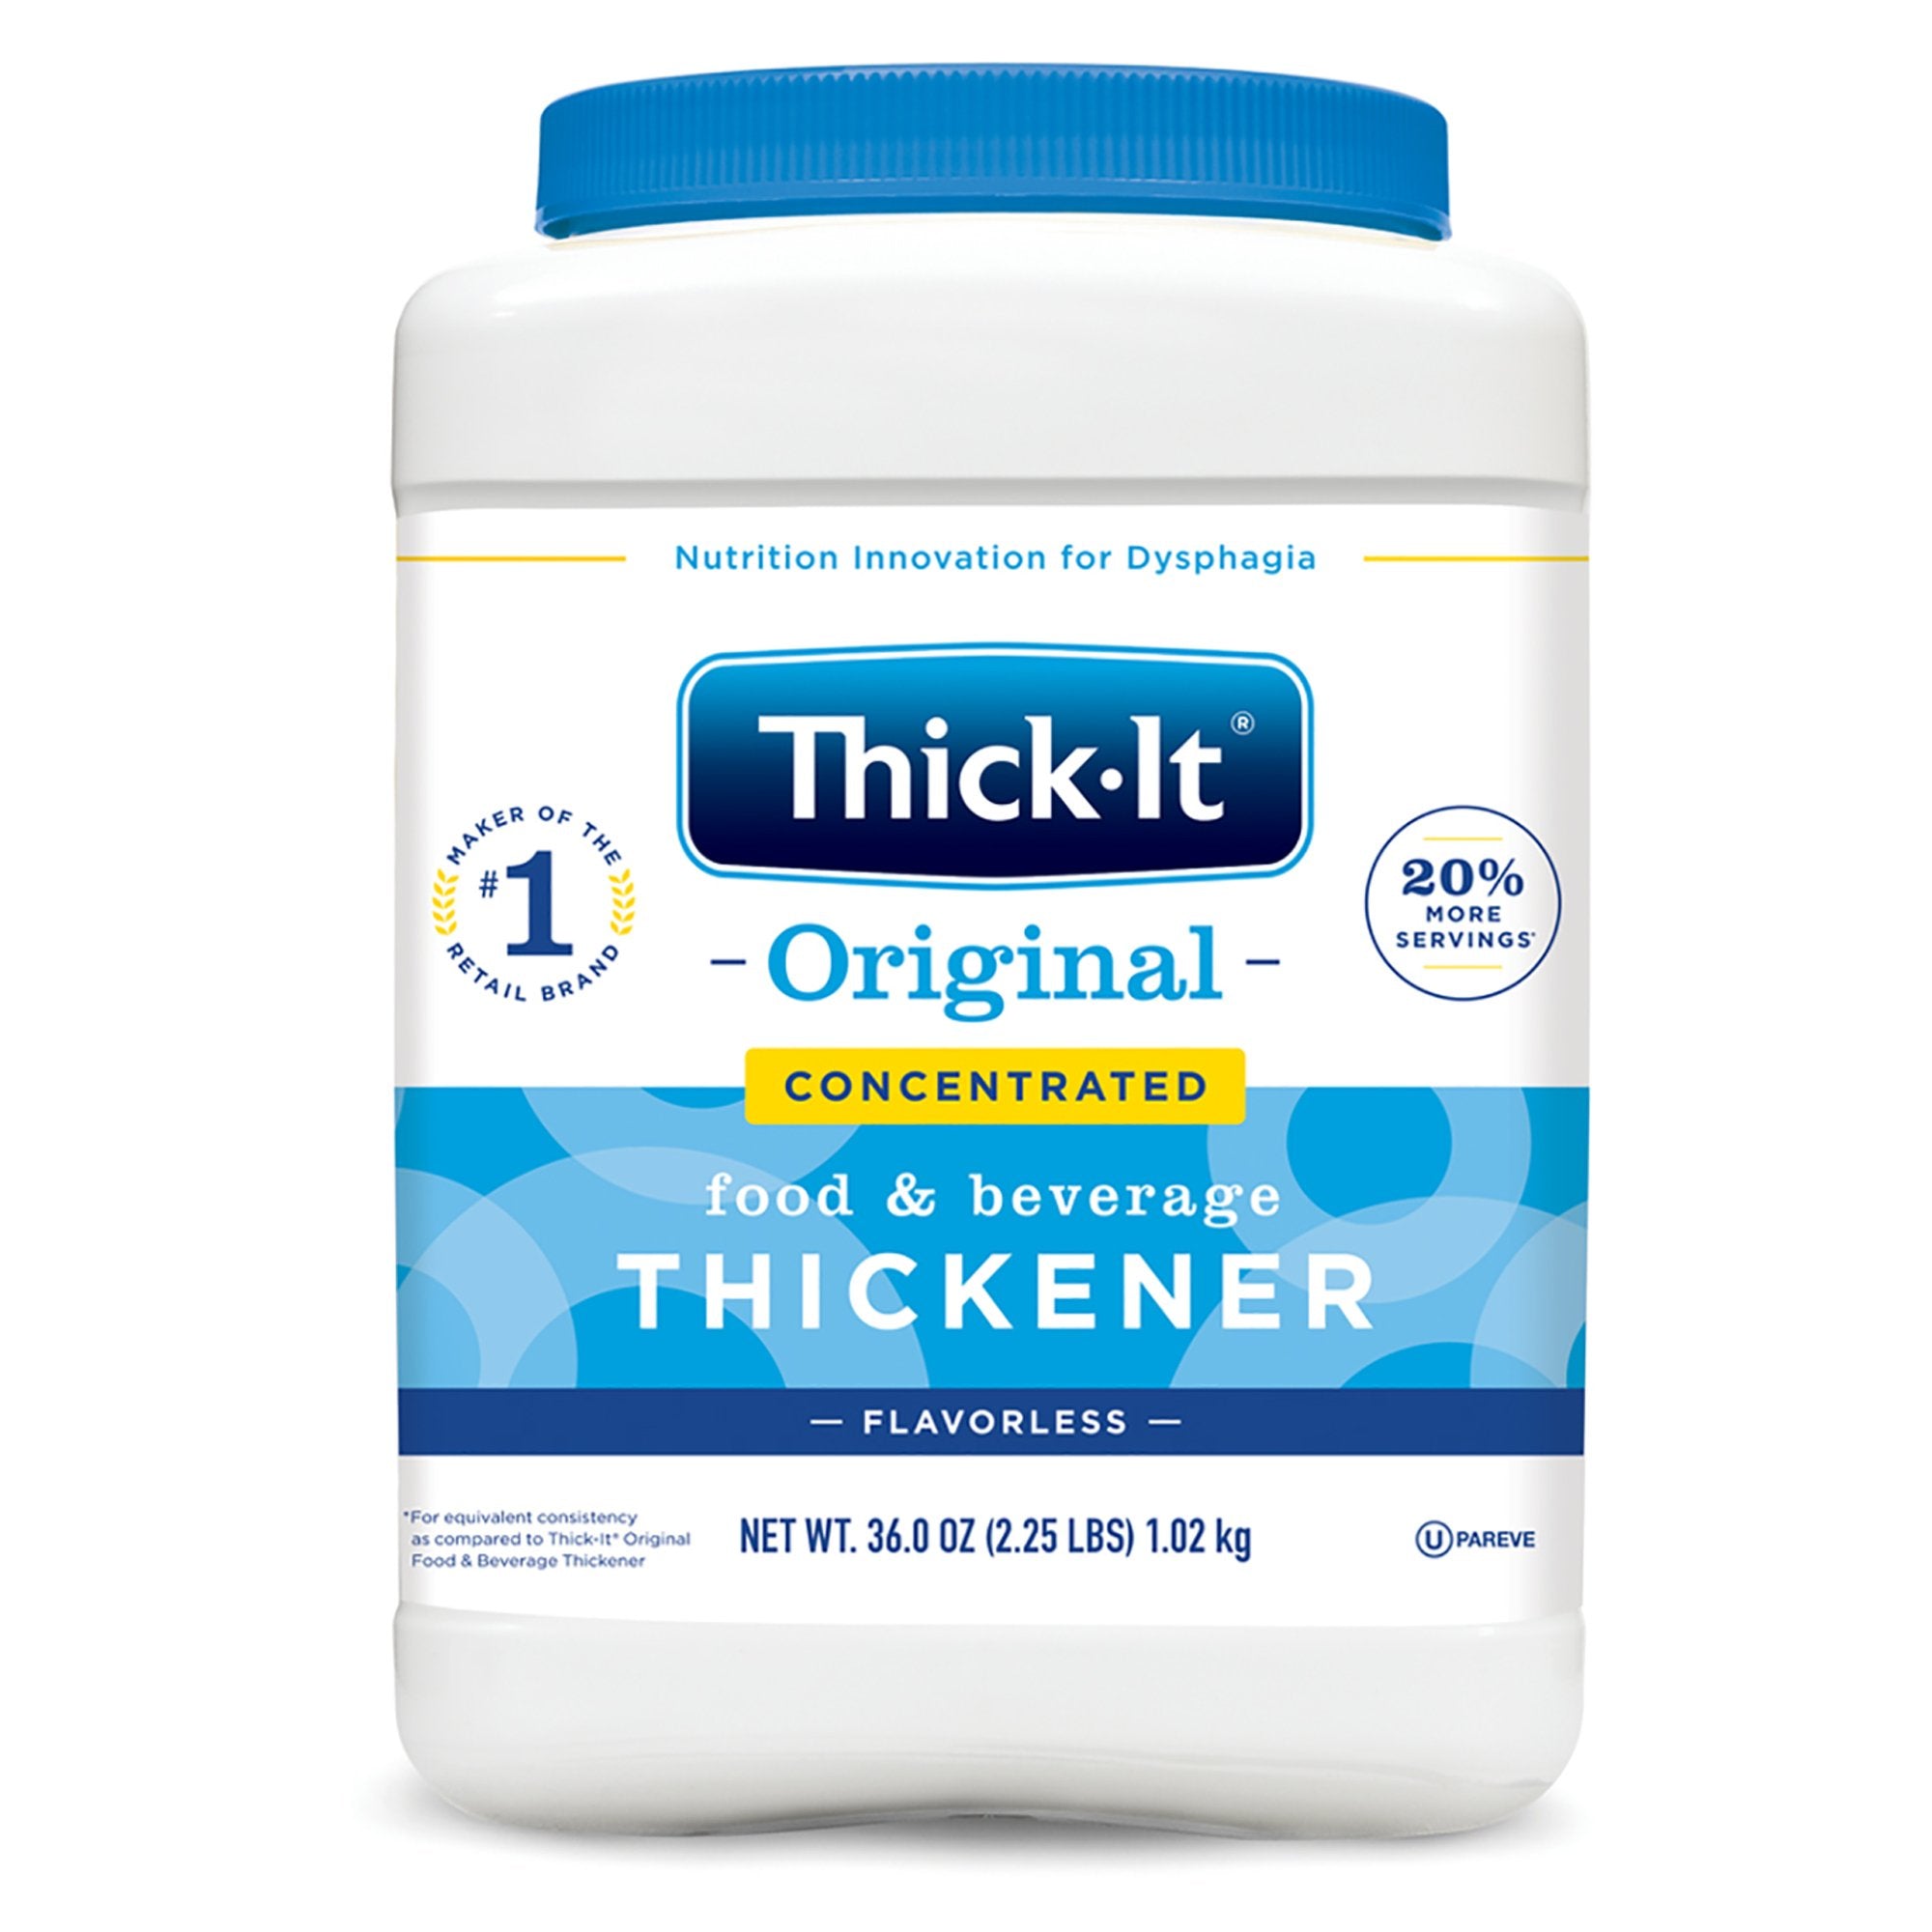 Food and Beverage Thickener Thick-It Original Concentrated 36 oz. Canister Unflavored Powder IDDSI Level 0 Thin